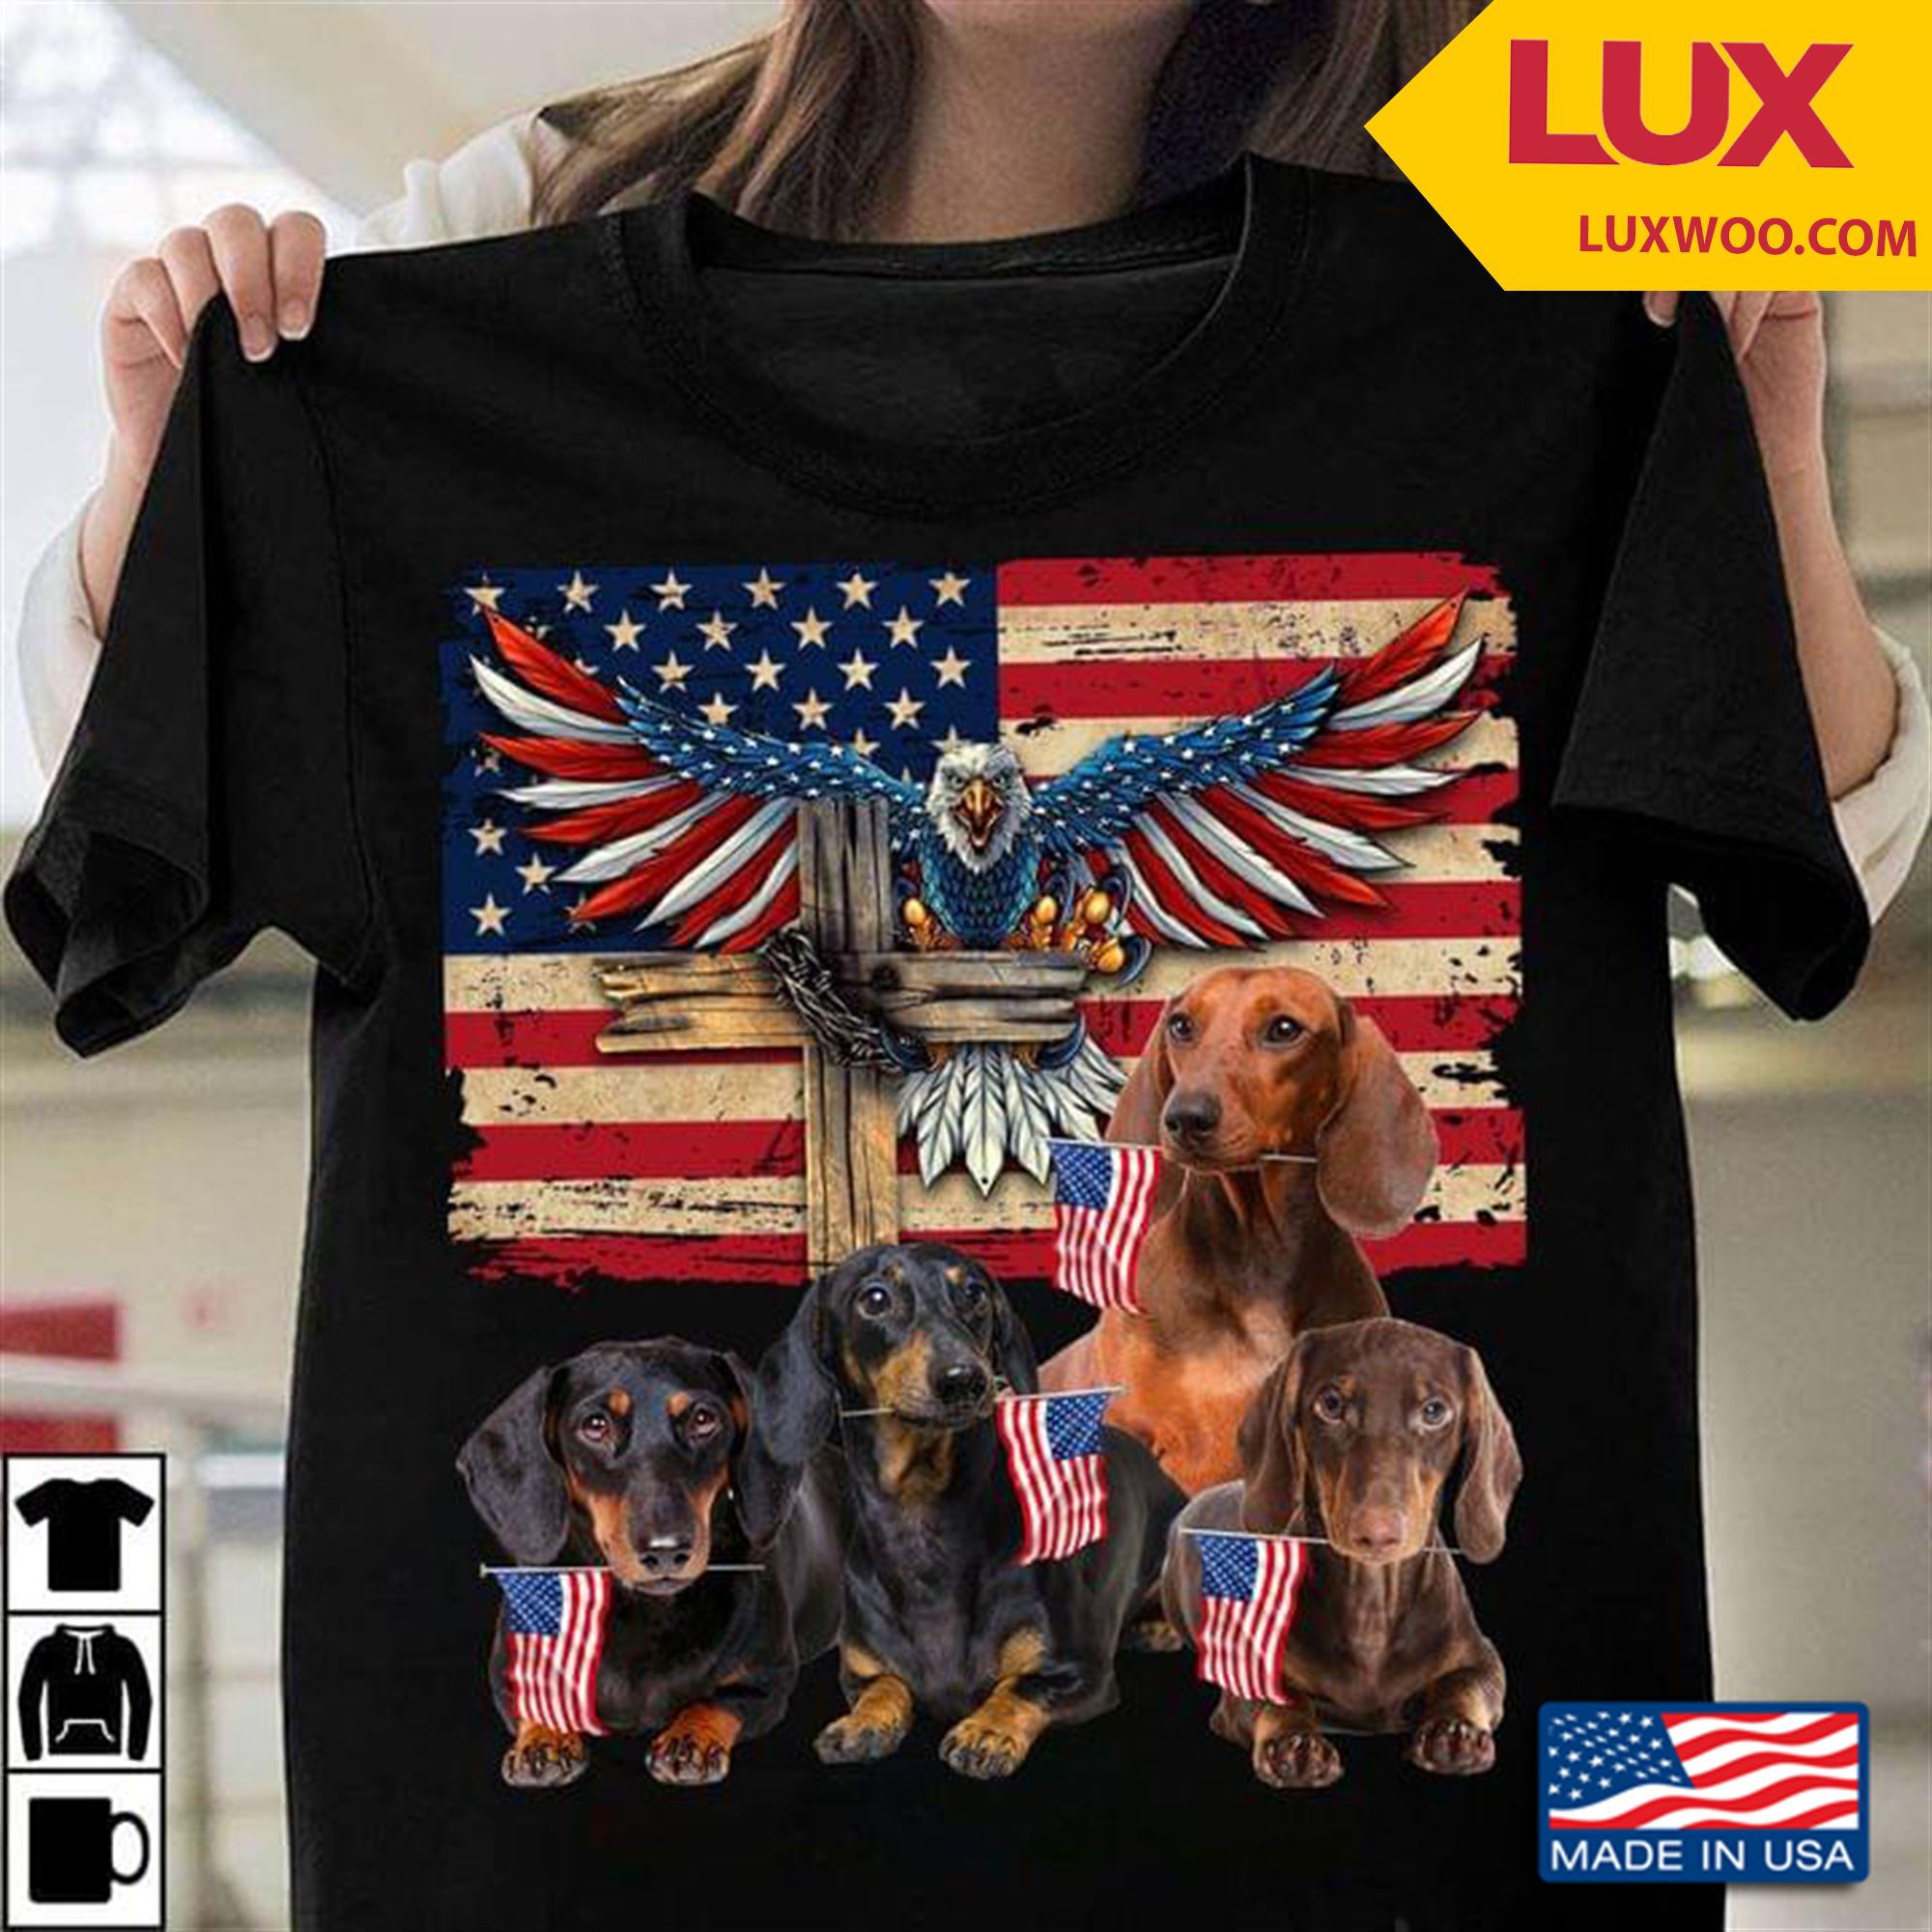 Four Dachshunds Eagle And American Flag Shirt Plus Size Up To 5xl